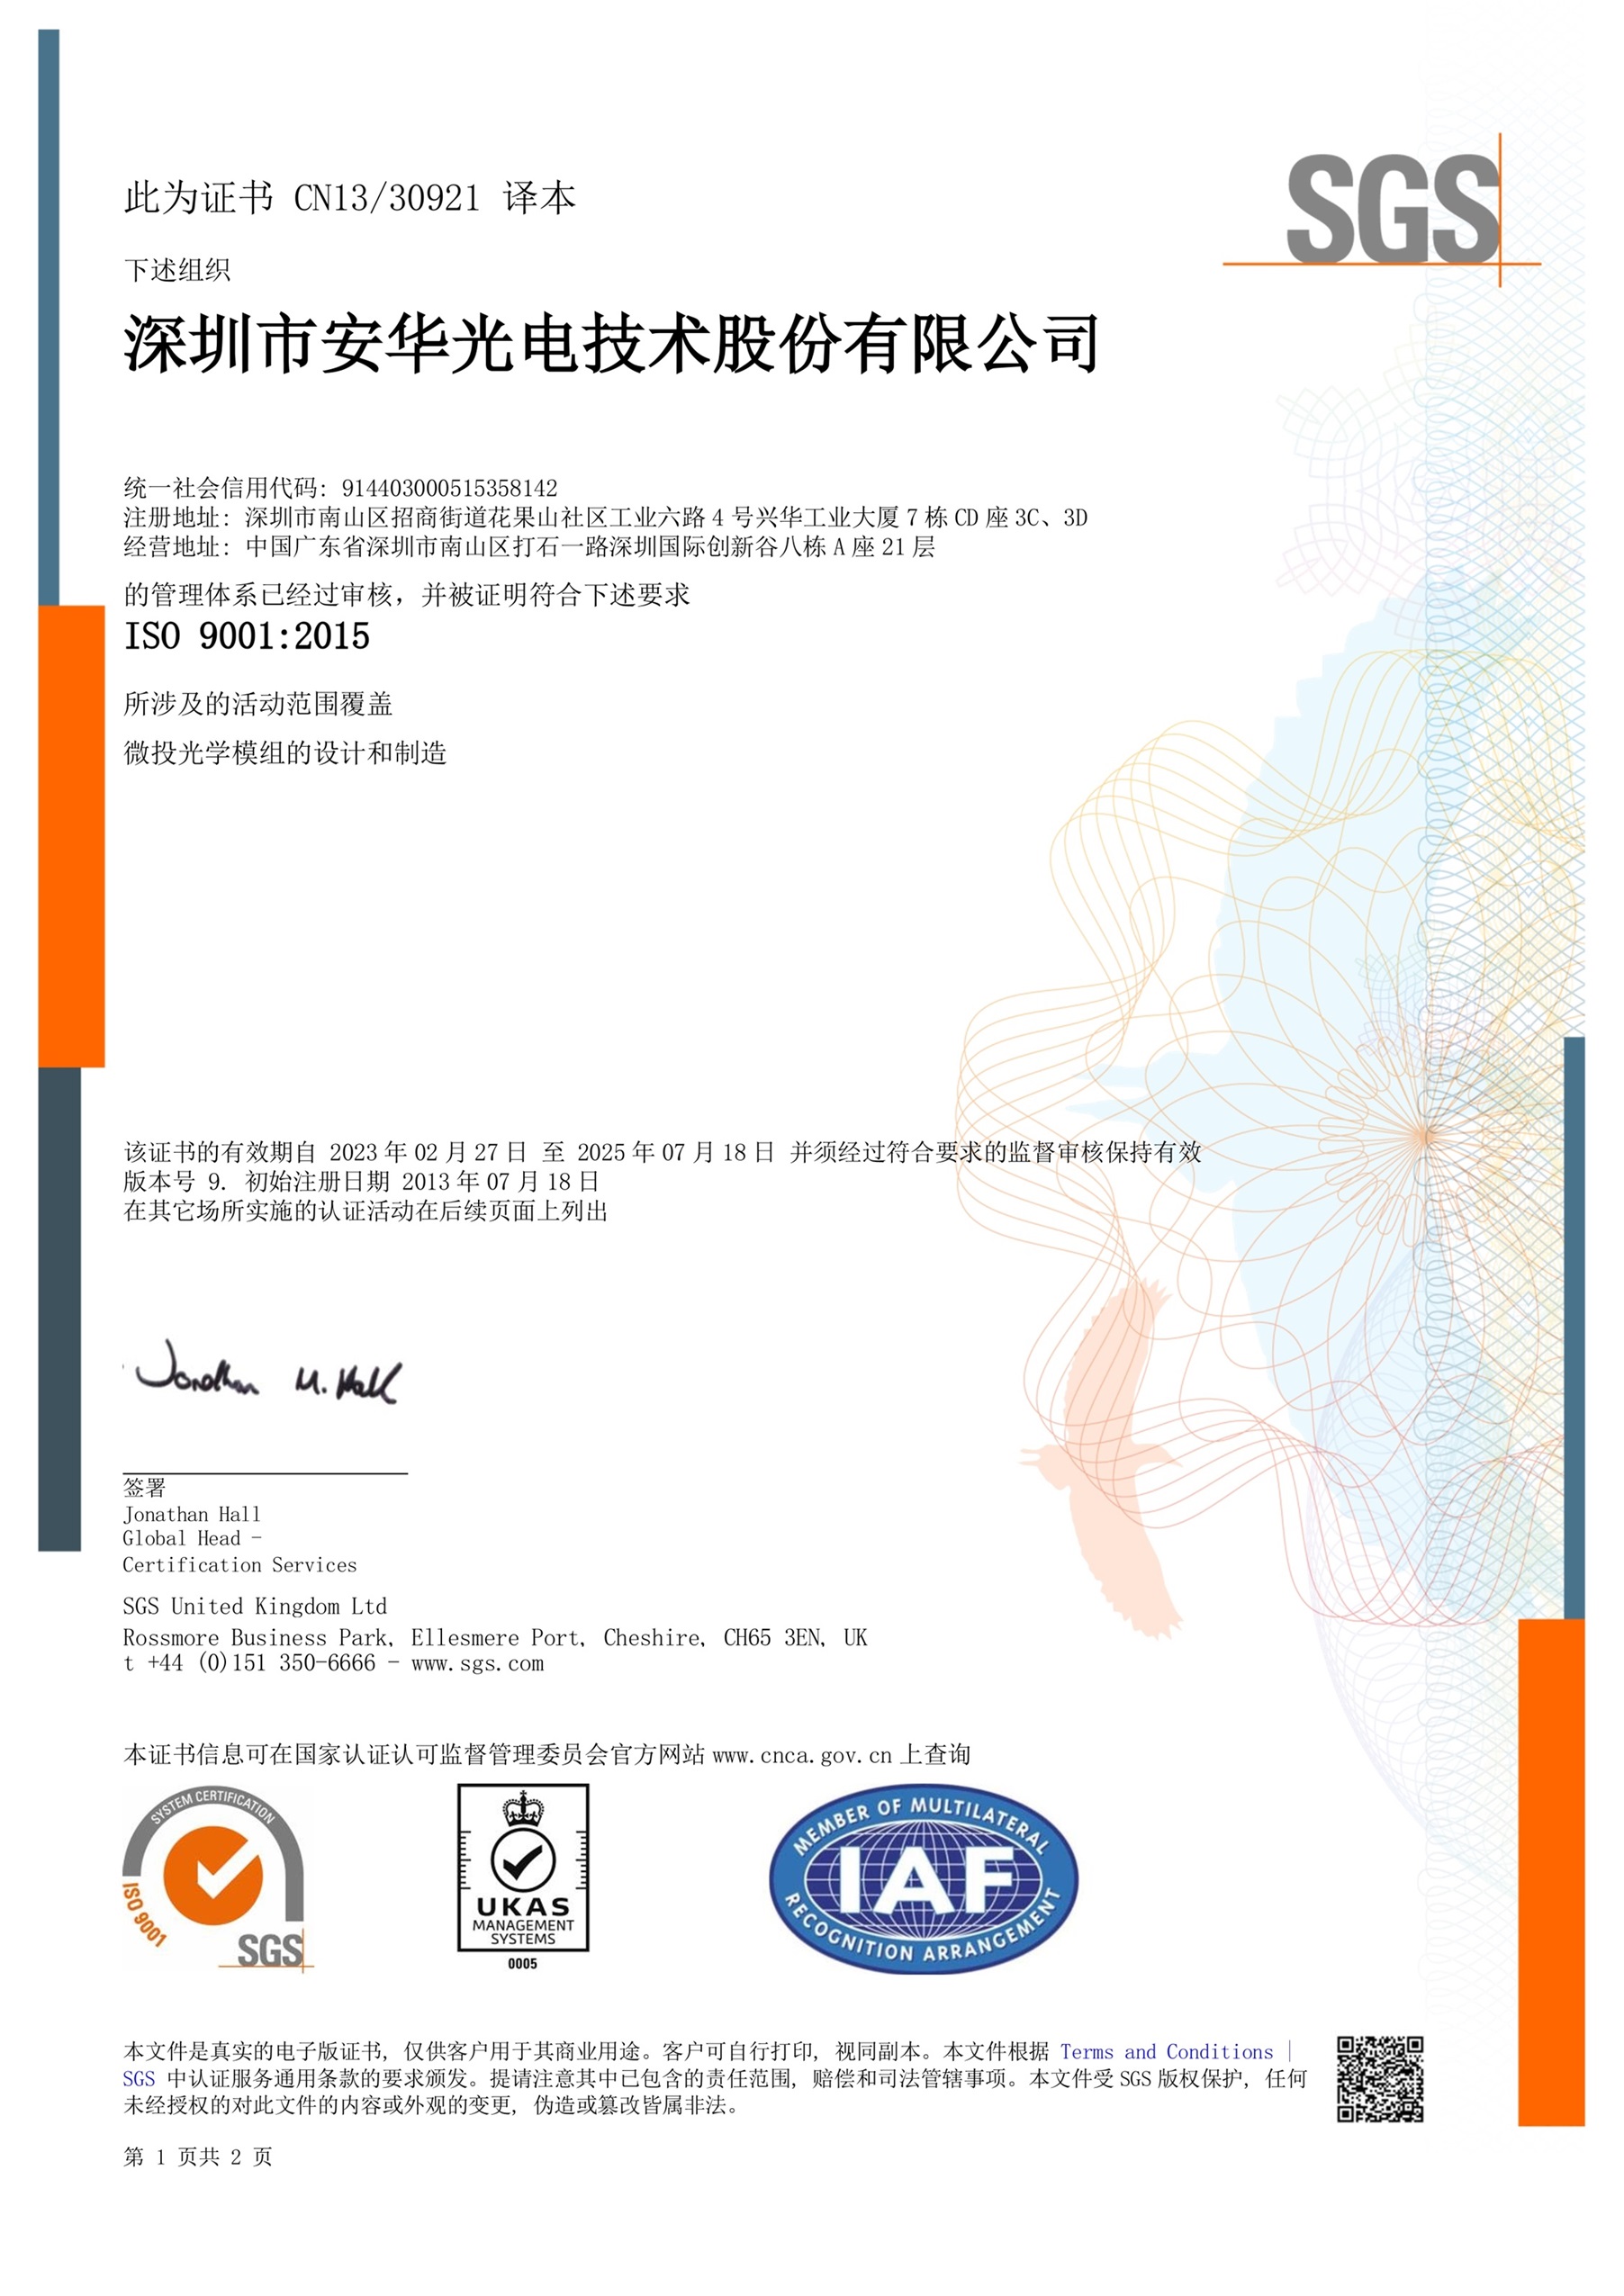 ISO9001 quality system certification